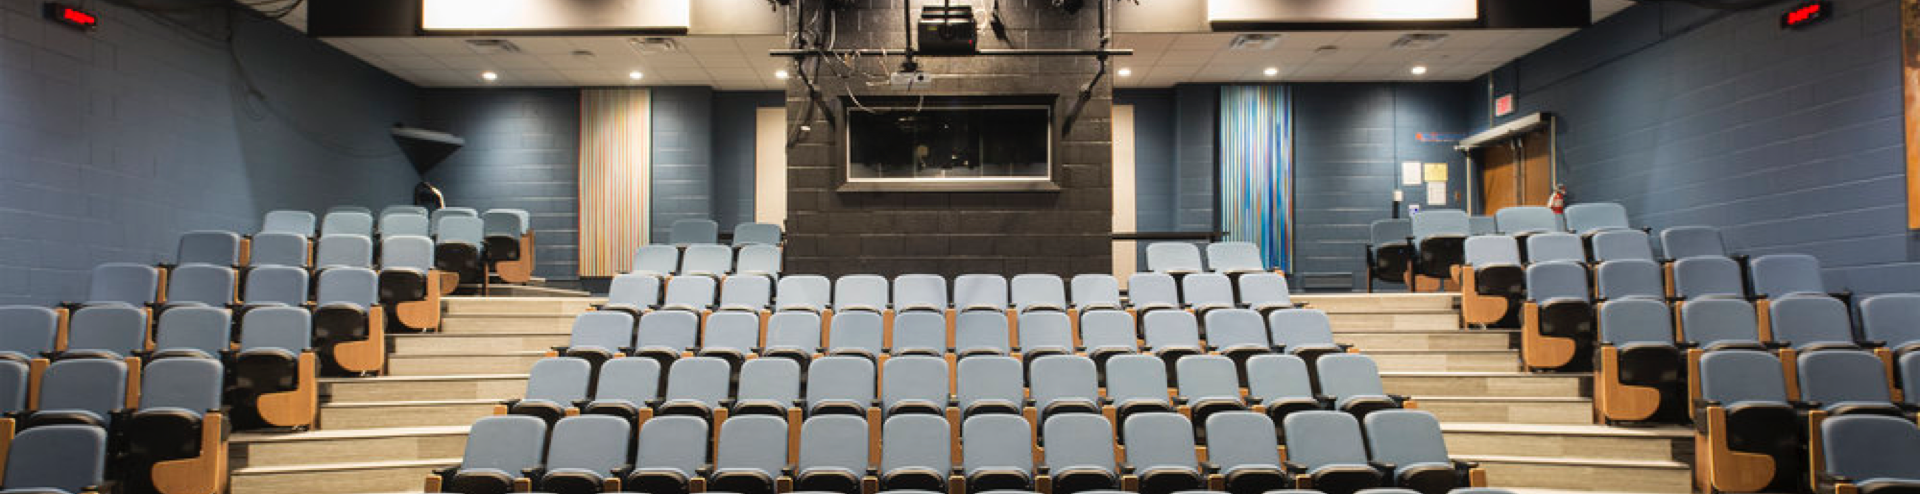 Audience seating in theatre